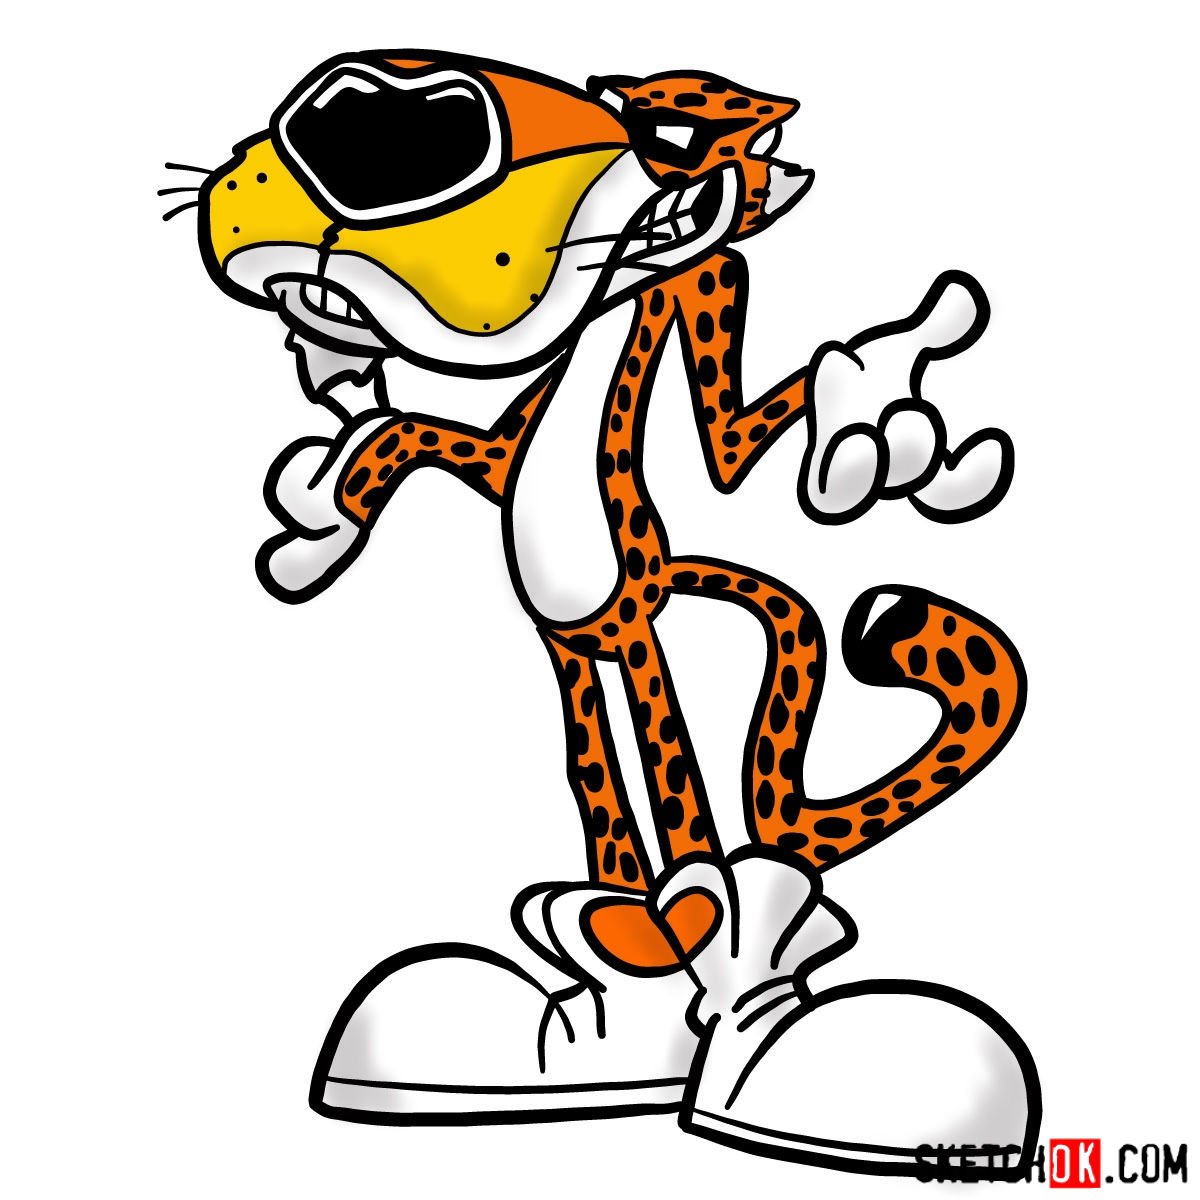 How to draw Chester Cheetah